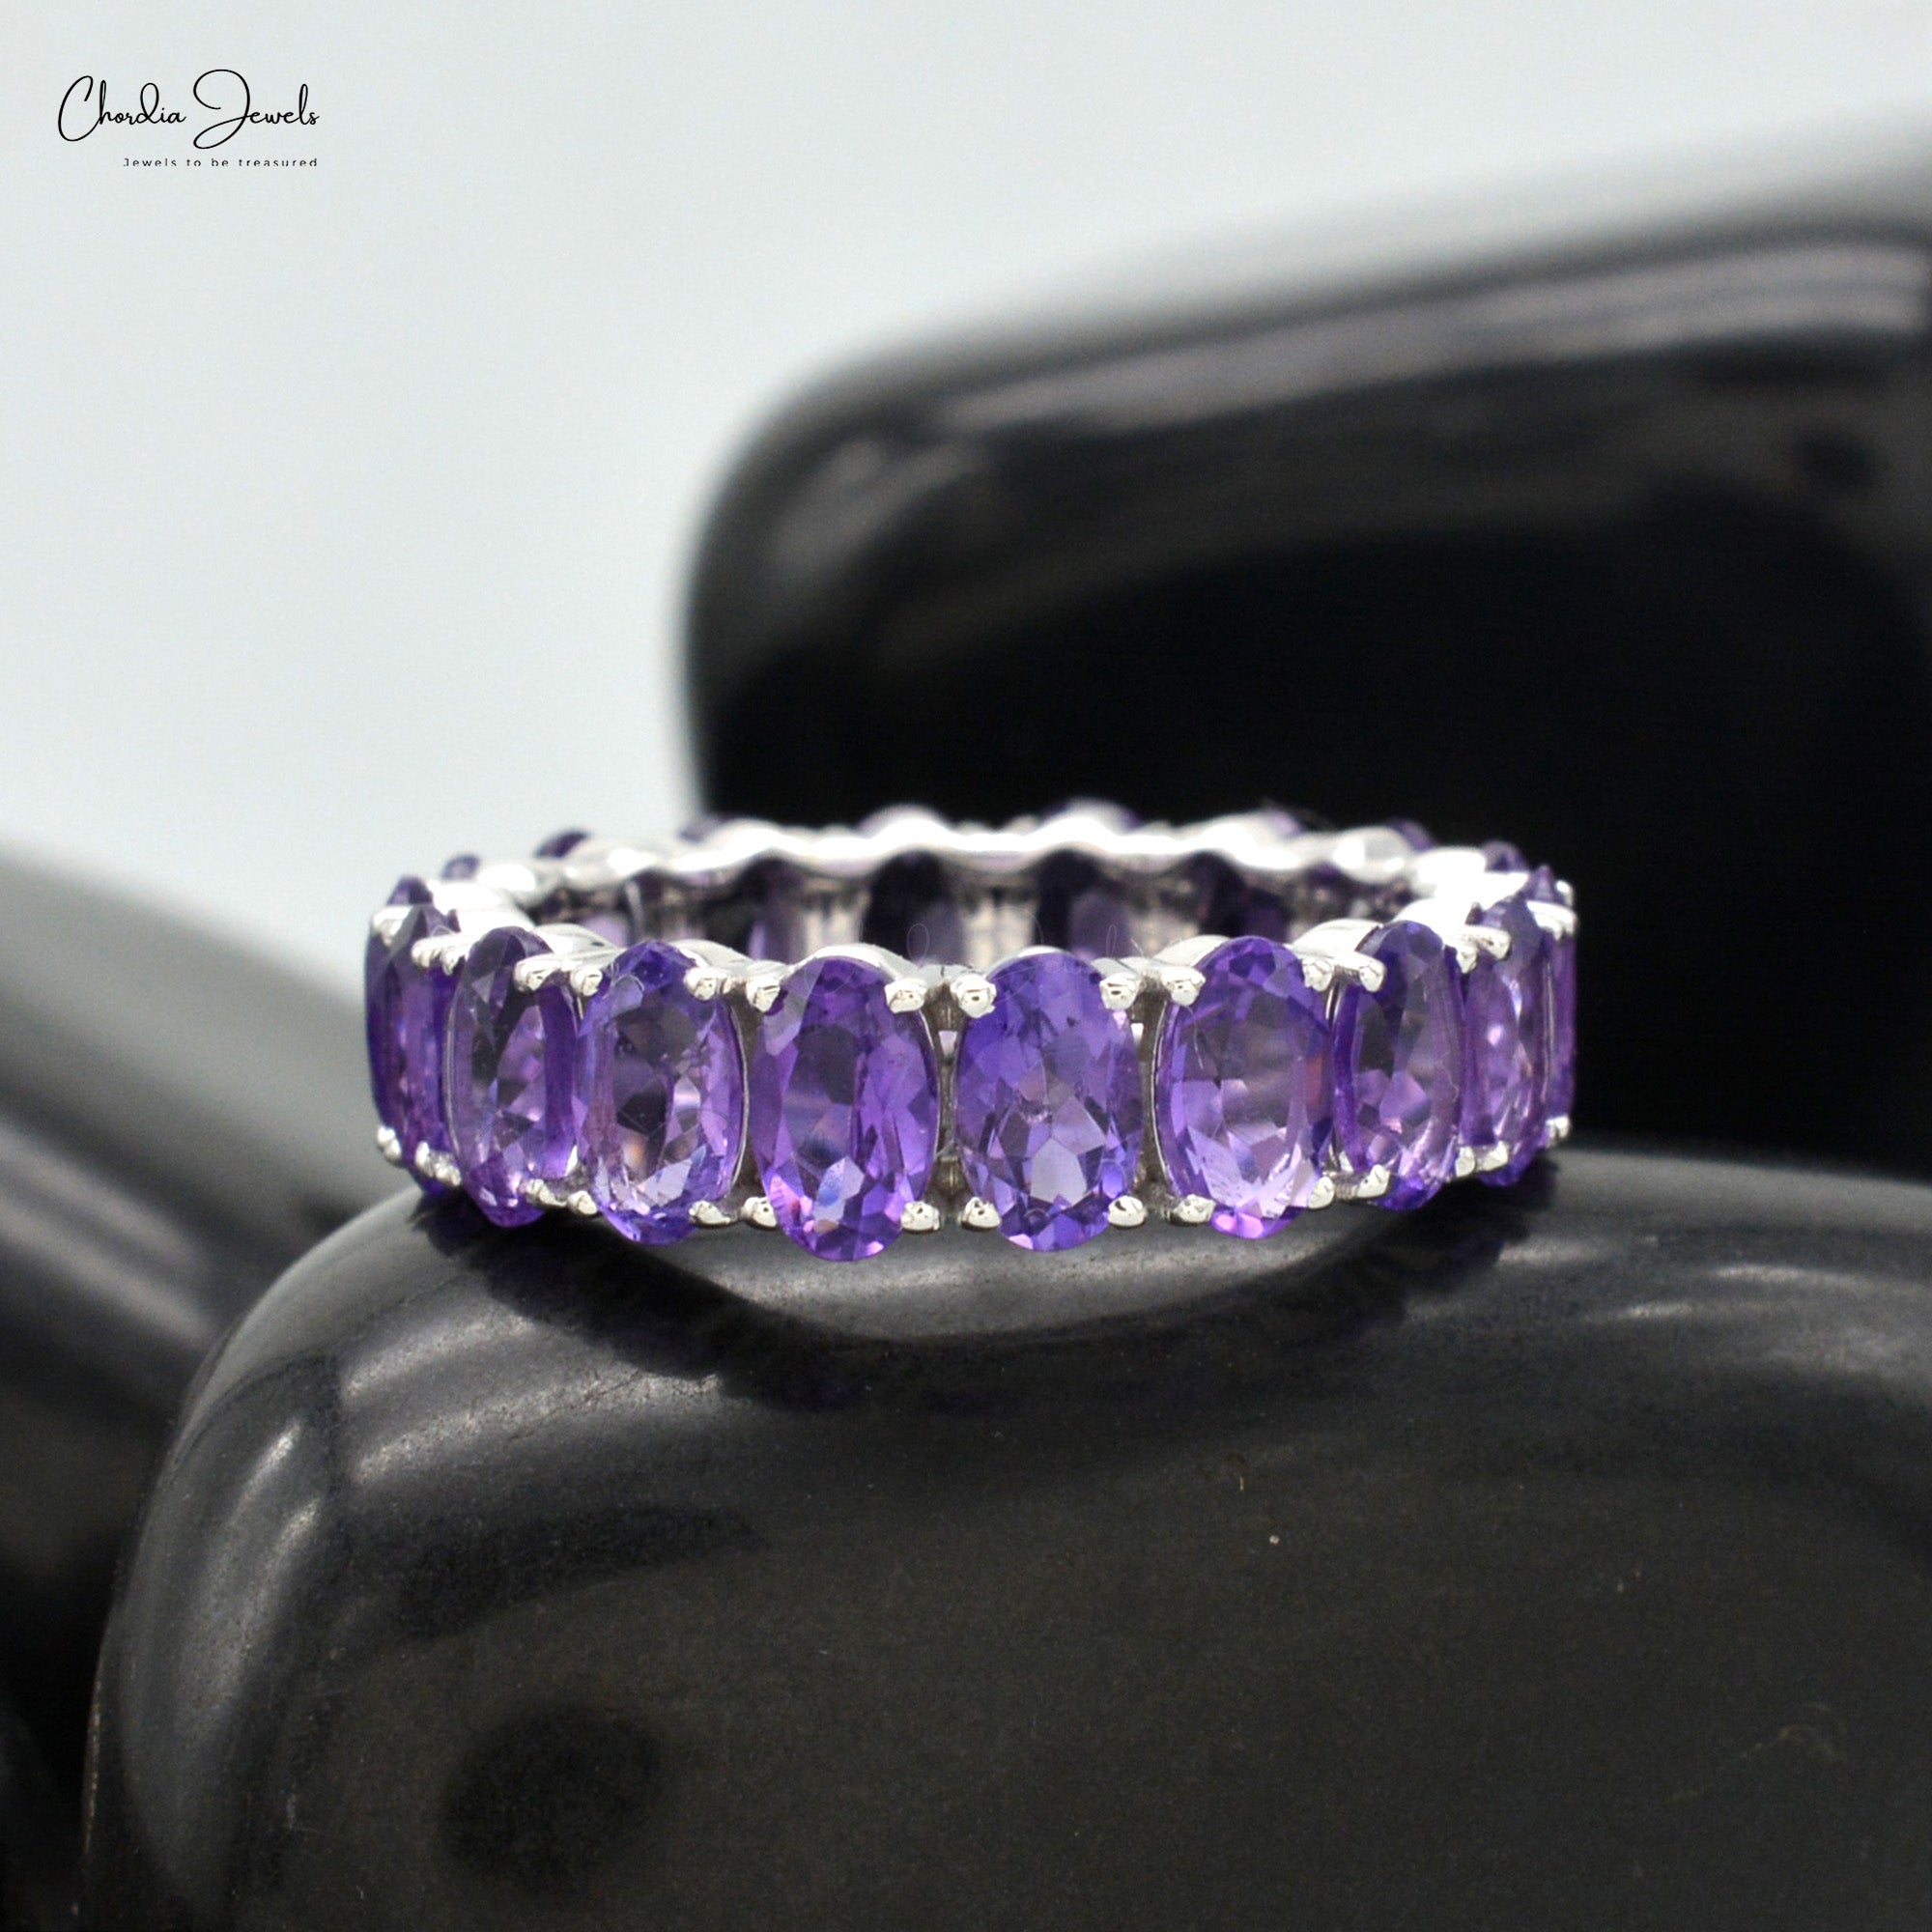 14K White Gold Amethyst Ring with Diamond Halo 4.70cts - Moriartys Gem Art